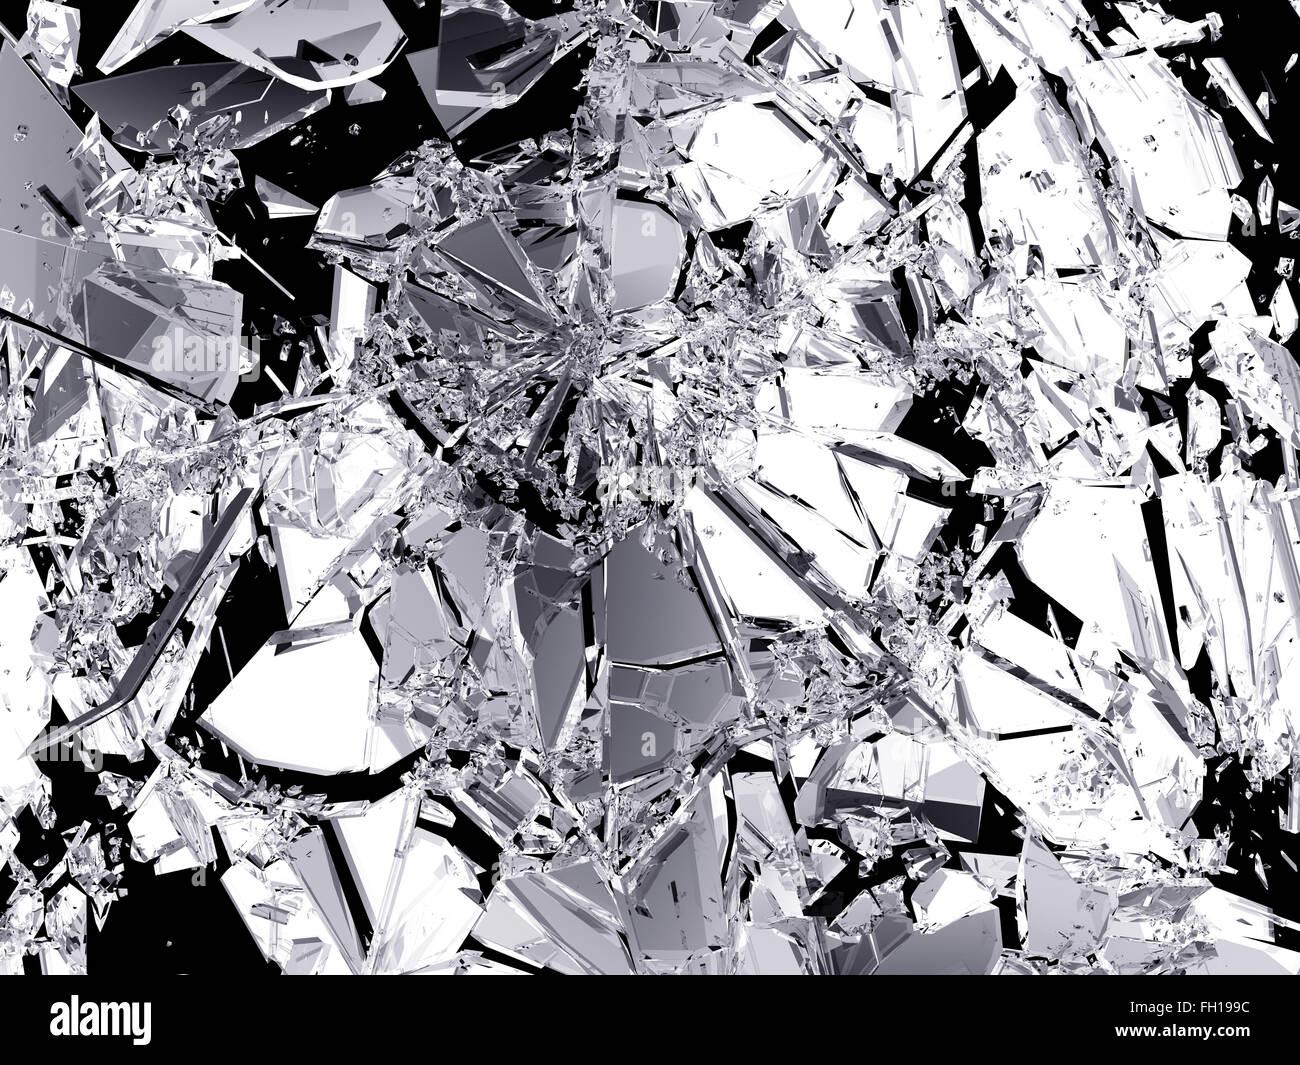 https://c8.alamy.com/comp/FH199C/pieces-of-destructed-shattered-glass-on-black-large-resolution-FH199C.jpg